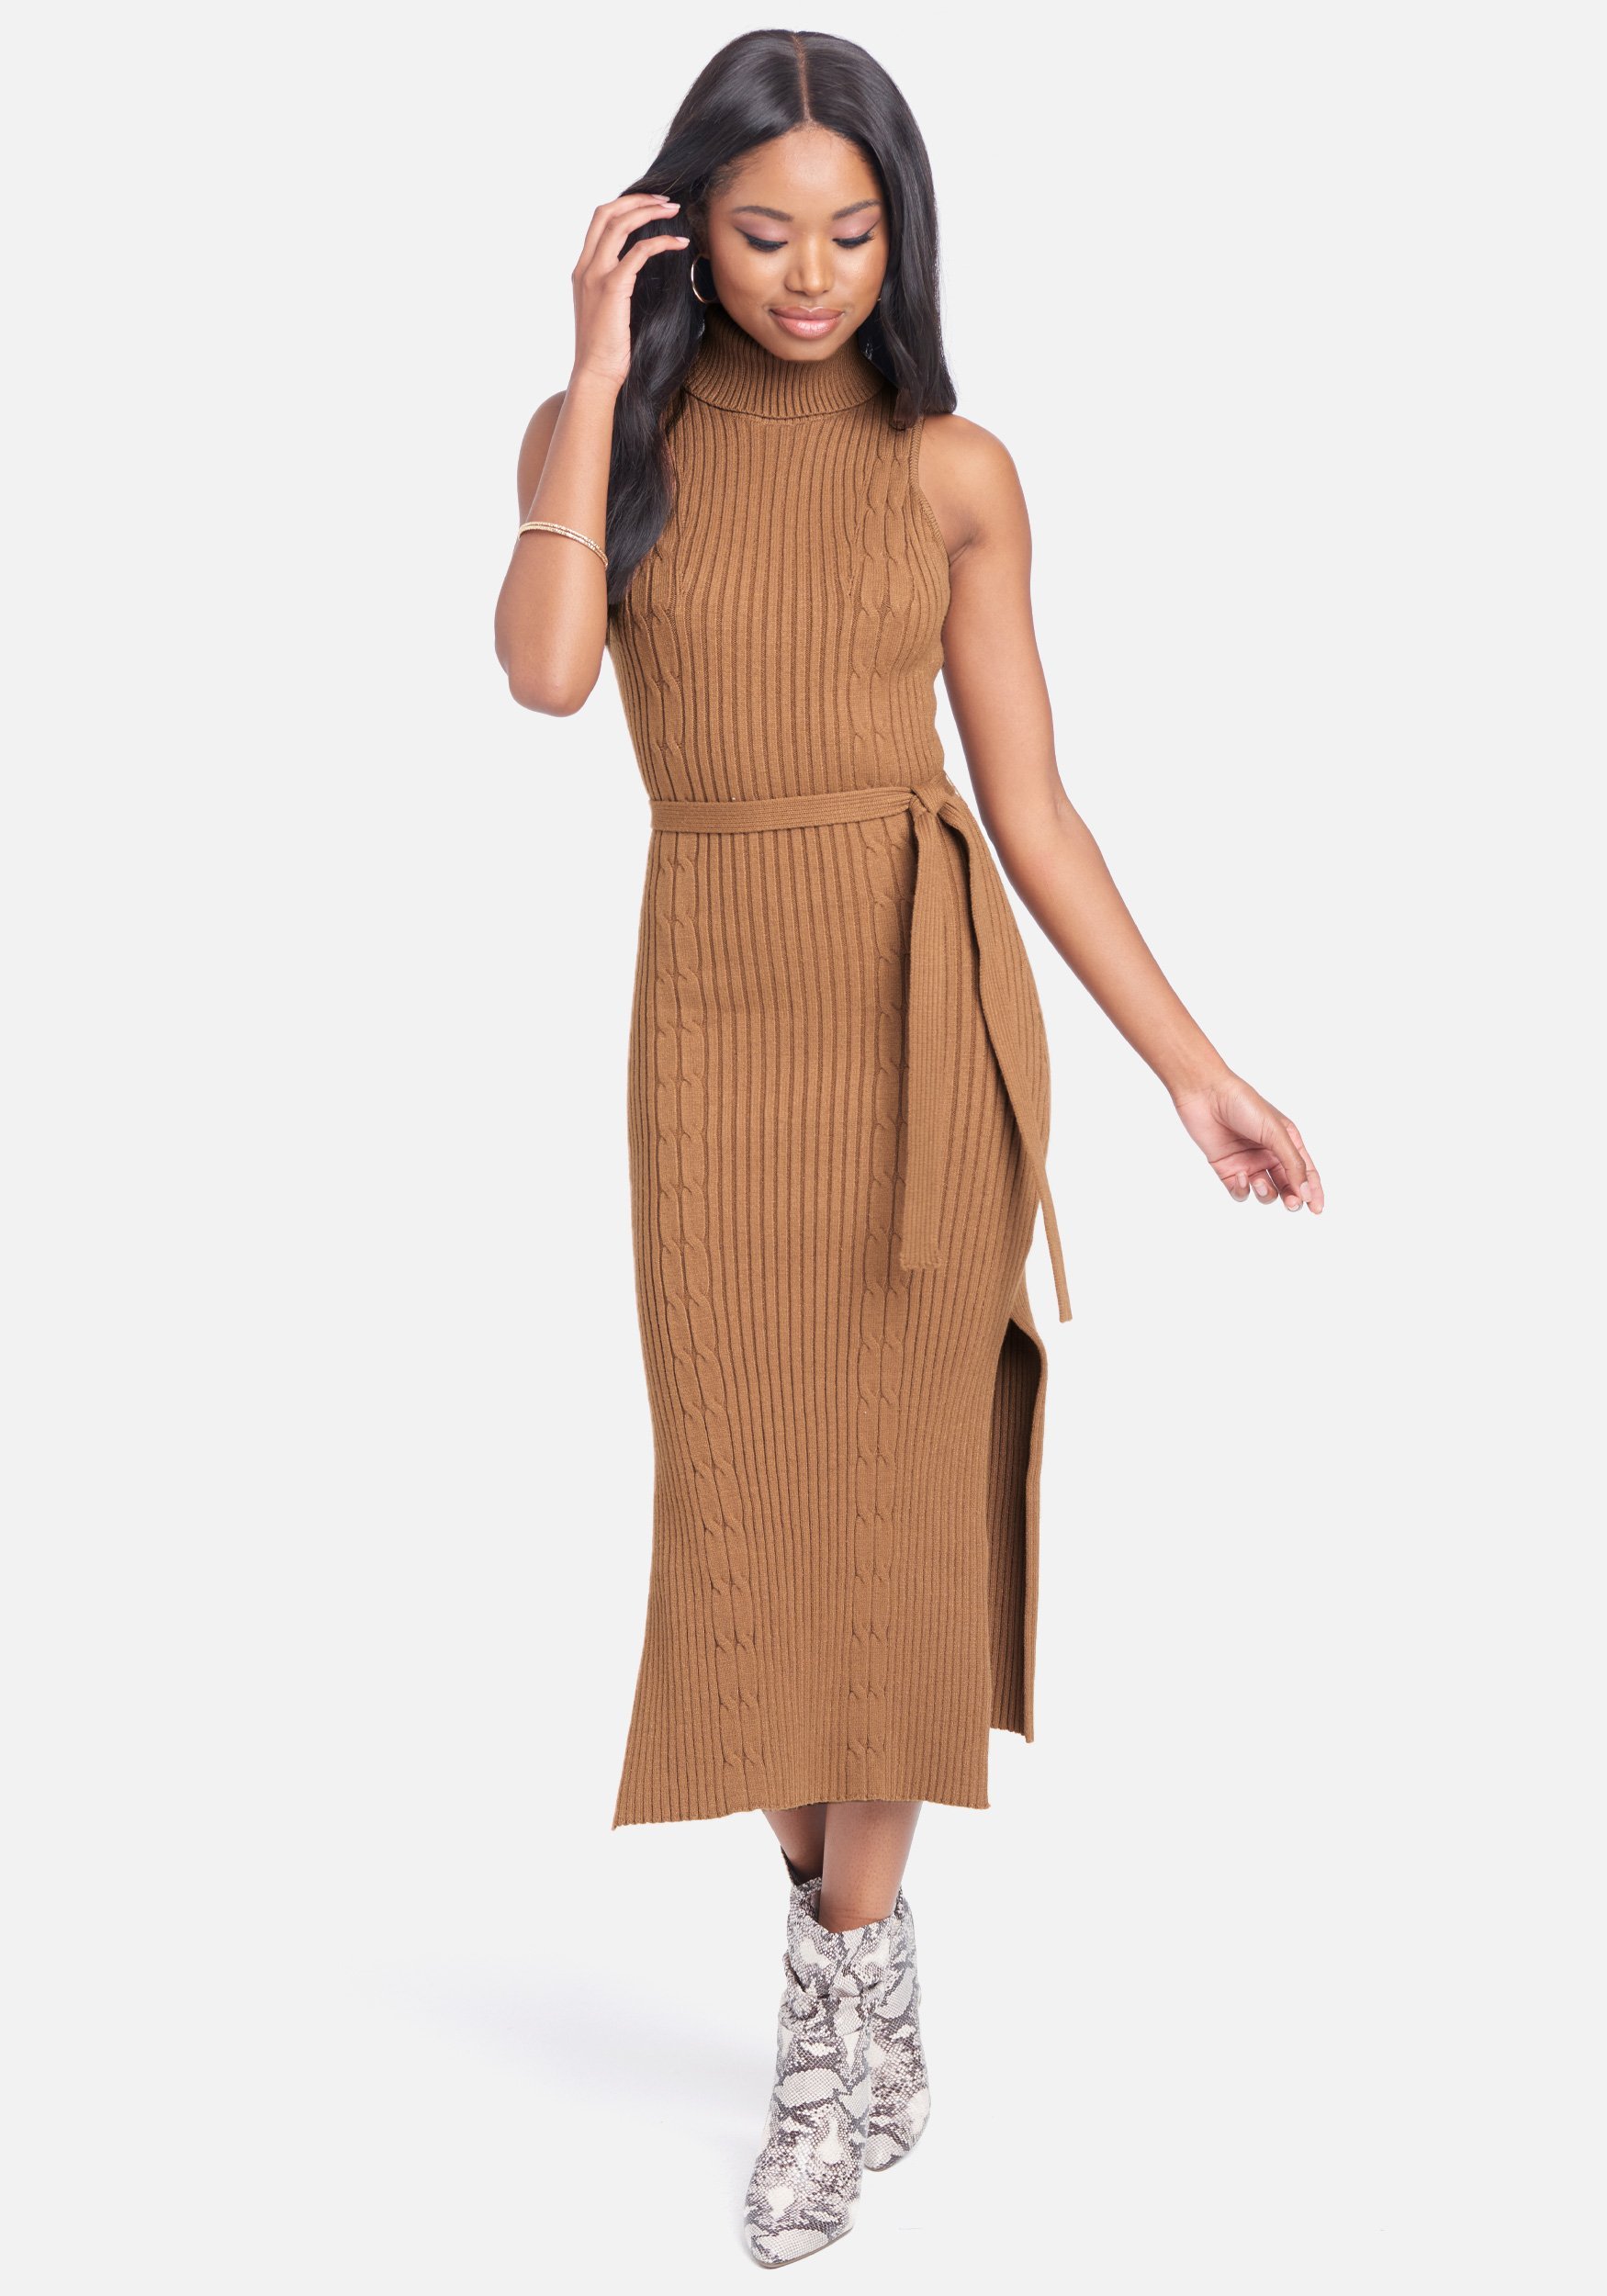 Bebe Women's Cable Midi Sweater Dress, Size Large in Tobacco Brown Nylon